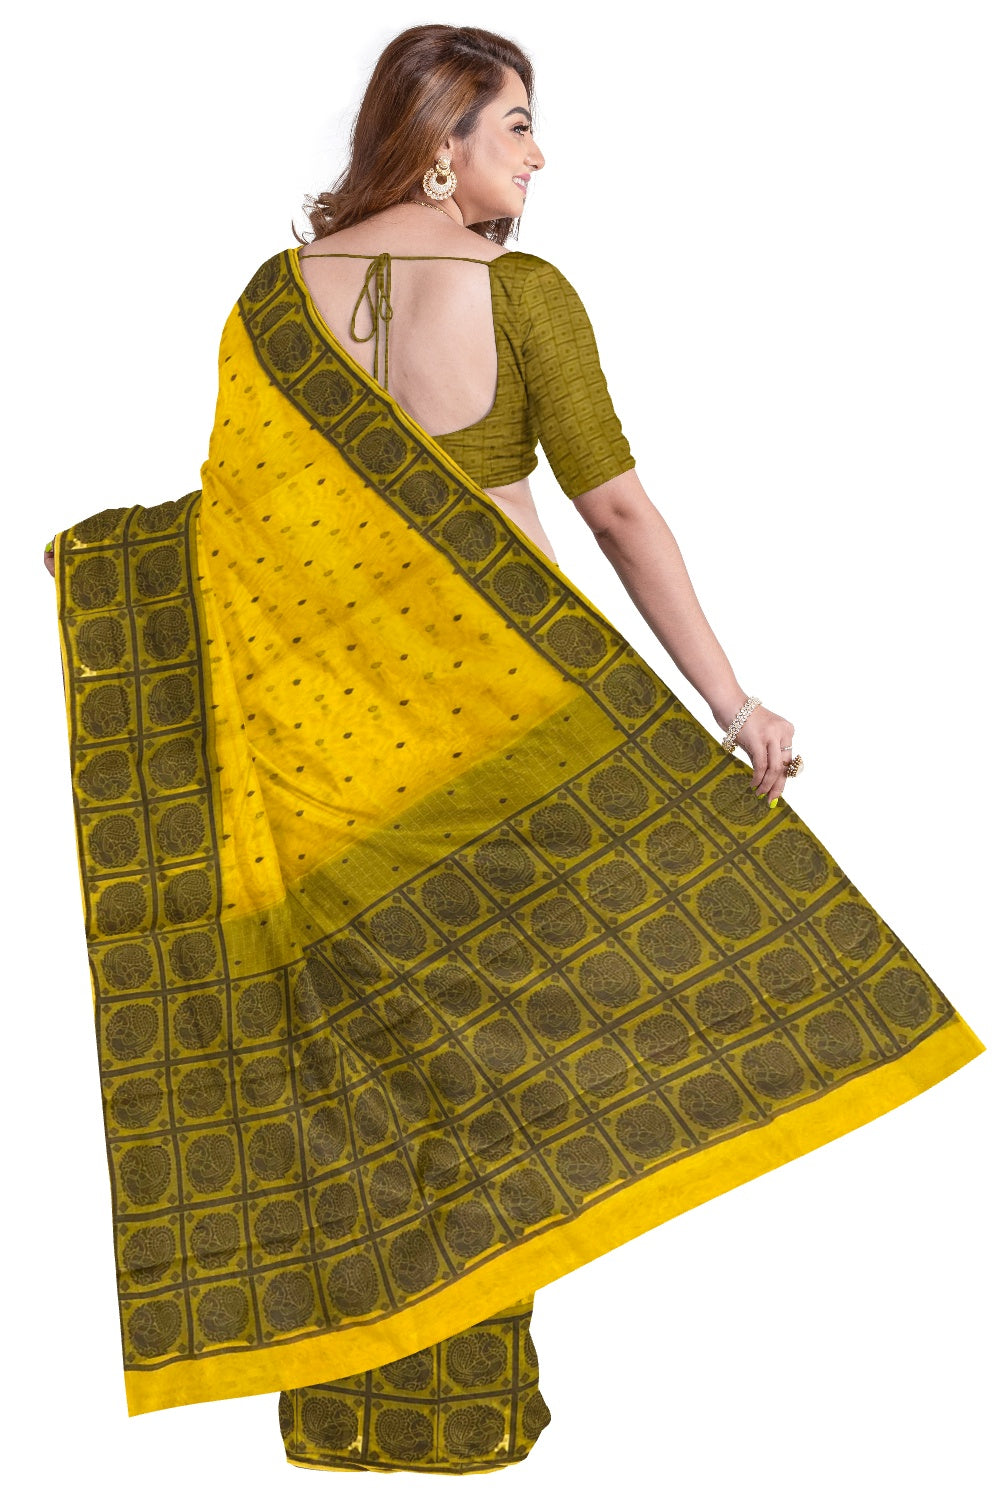 Southloom Sico Gadwal Semi Silk Saree in Mustard Yellow and Olive Green with Peacock Motifs (Blouse Piece with Work)